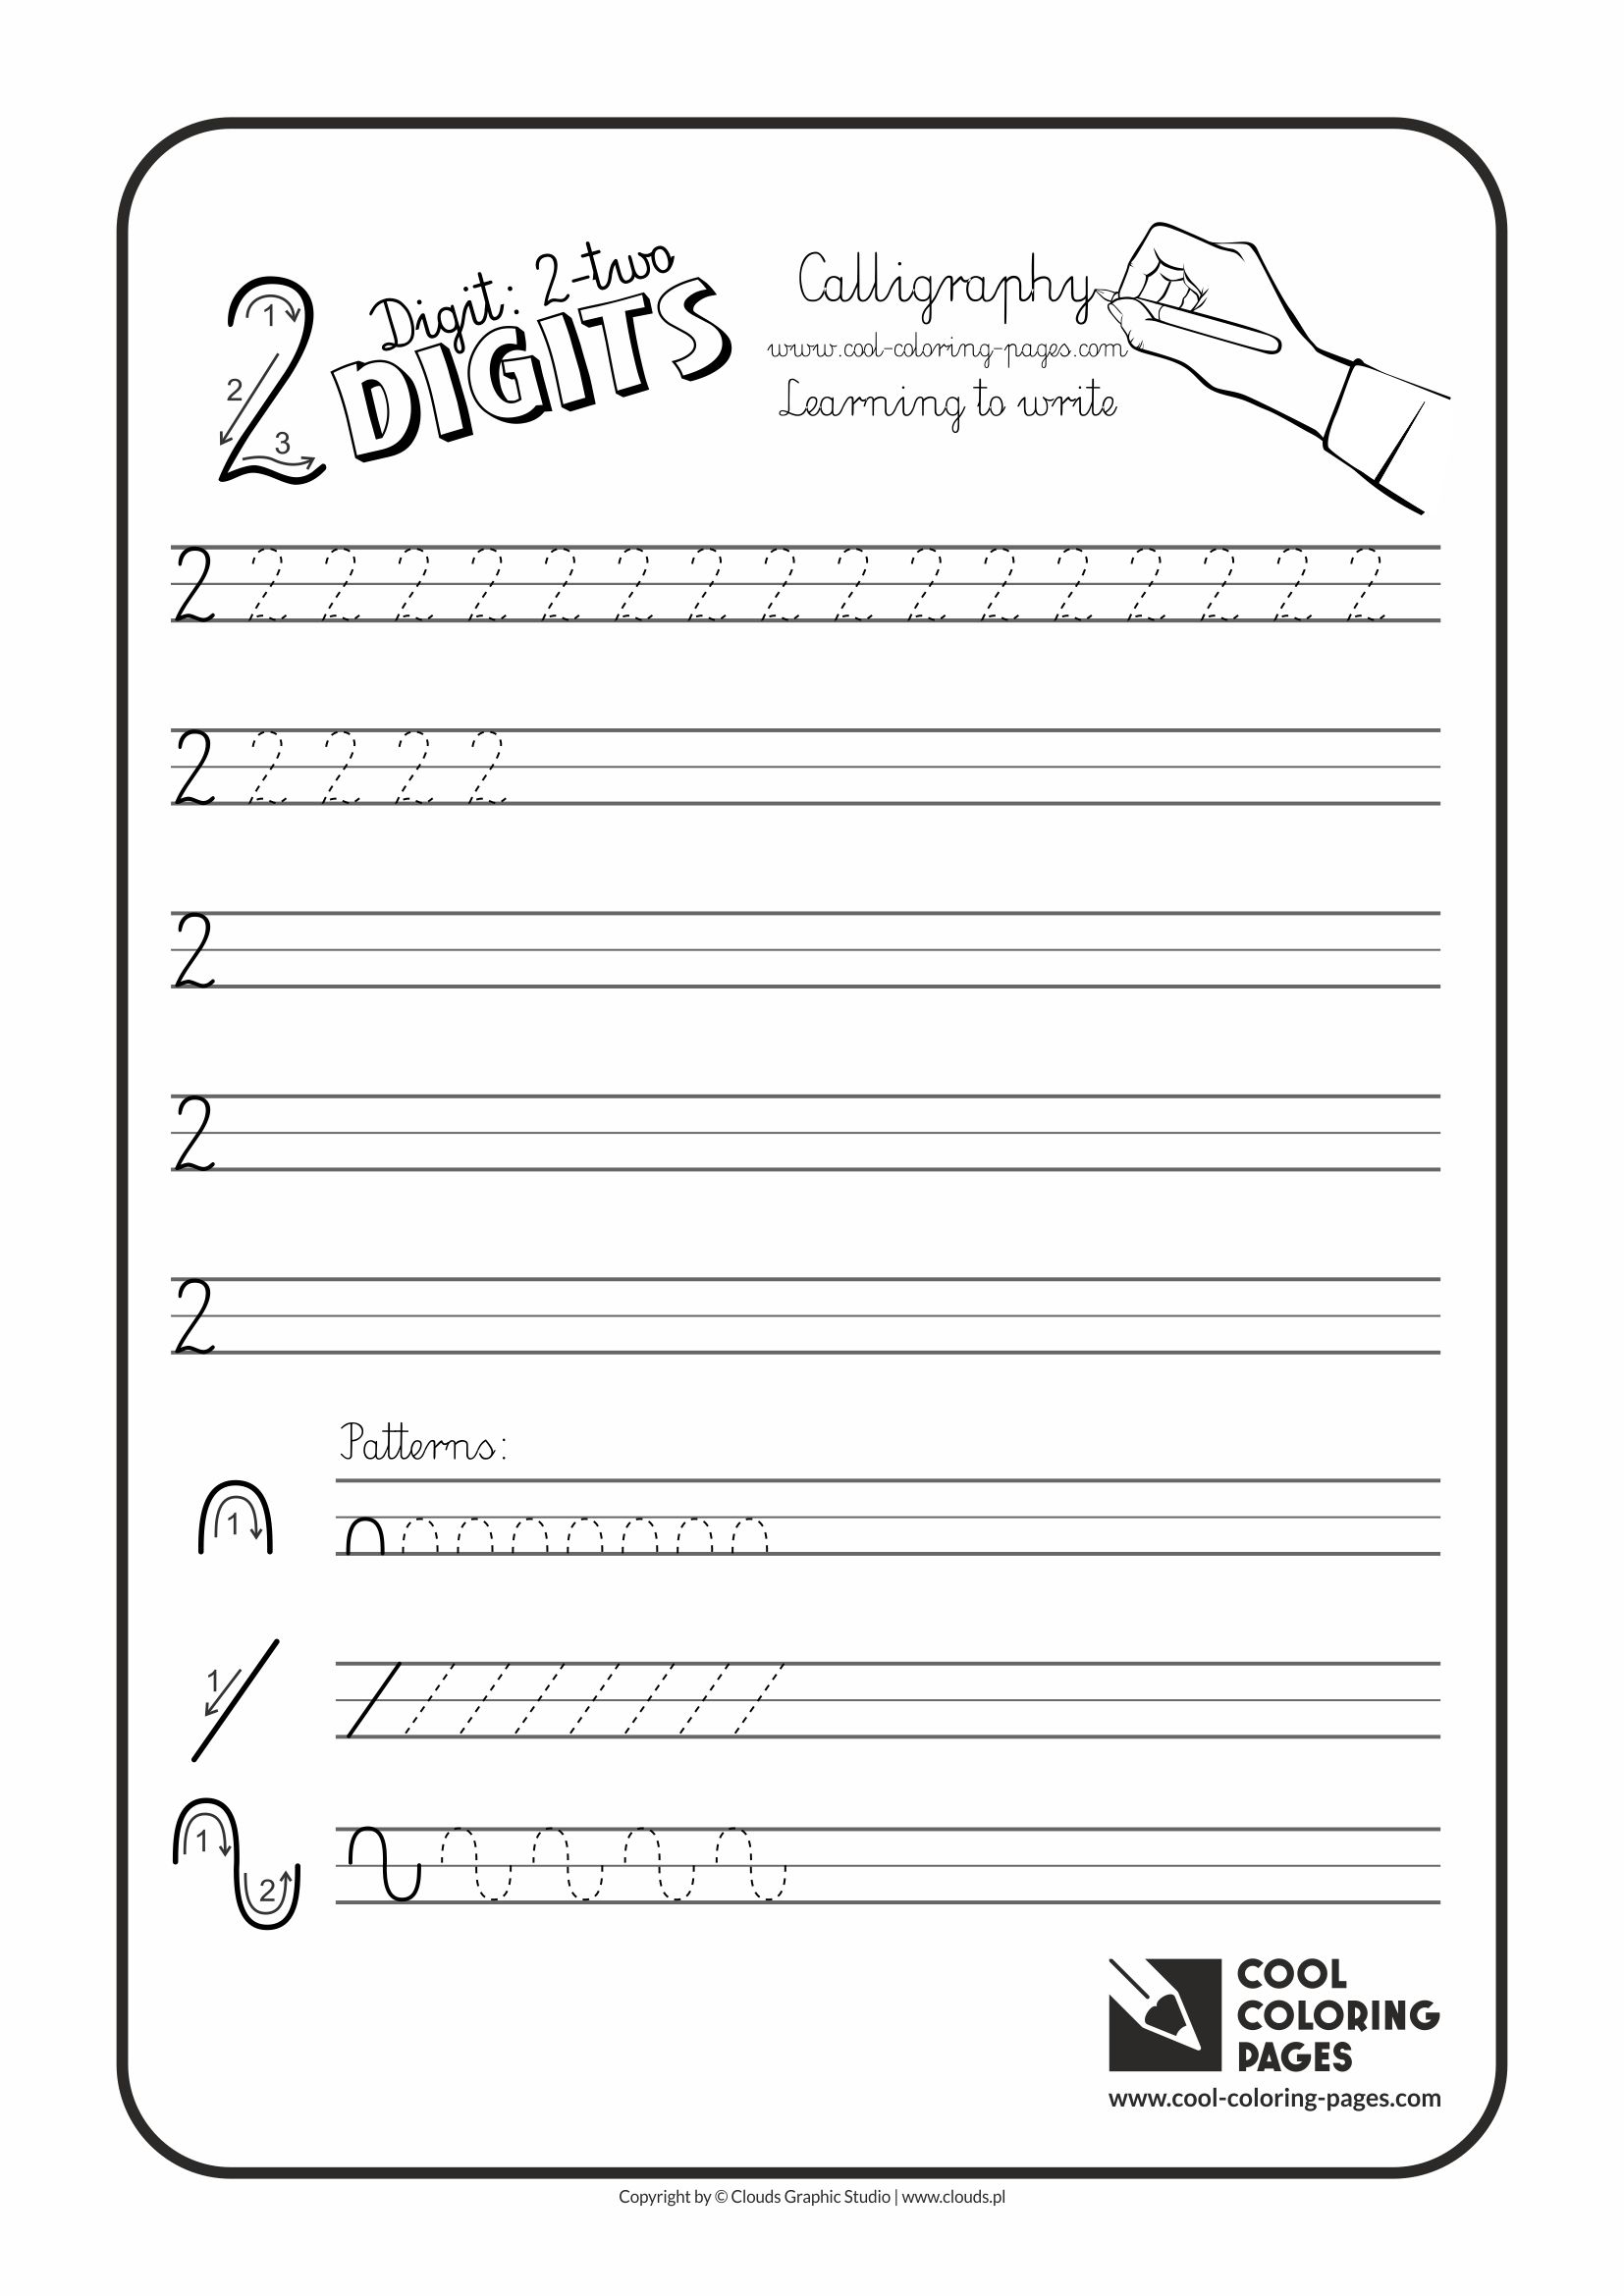 Cool Coloring Pages / Calligraphy / Digit 2 / Handwriting for kids